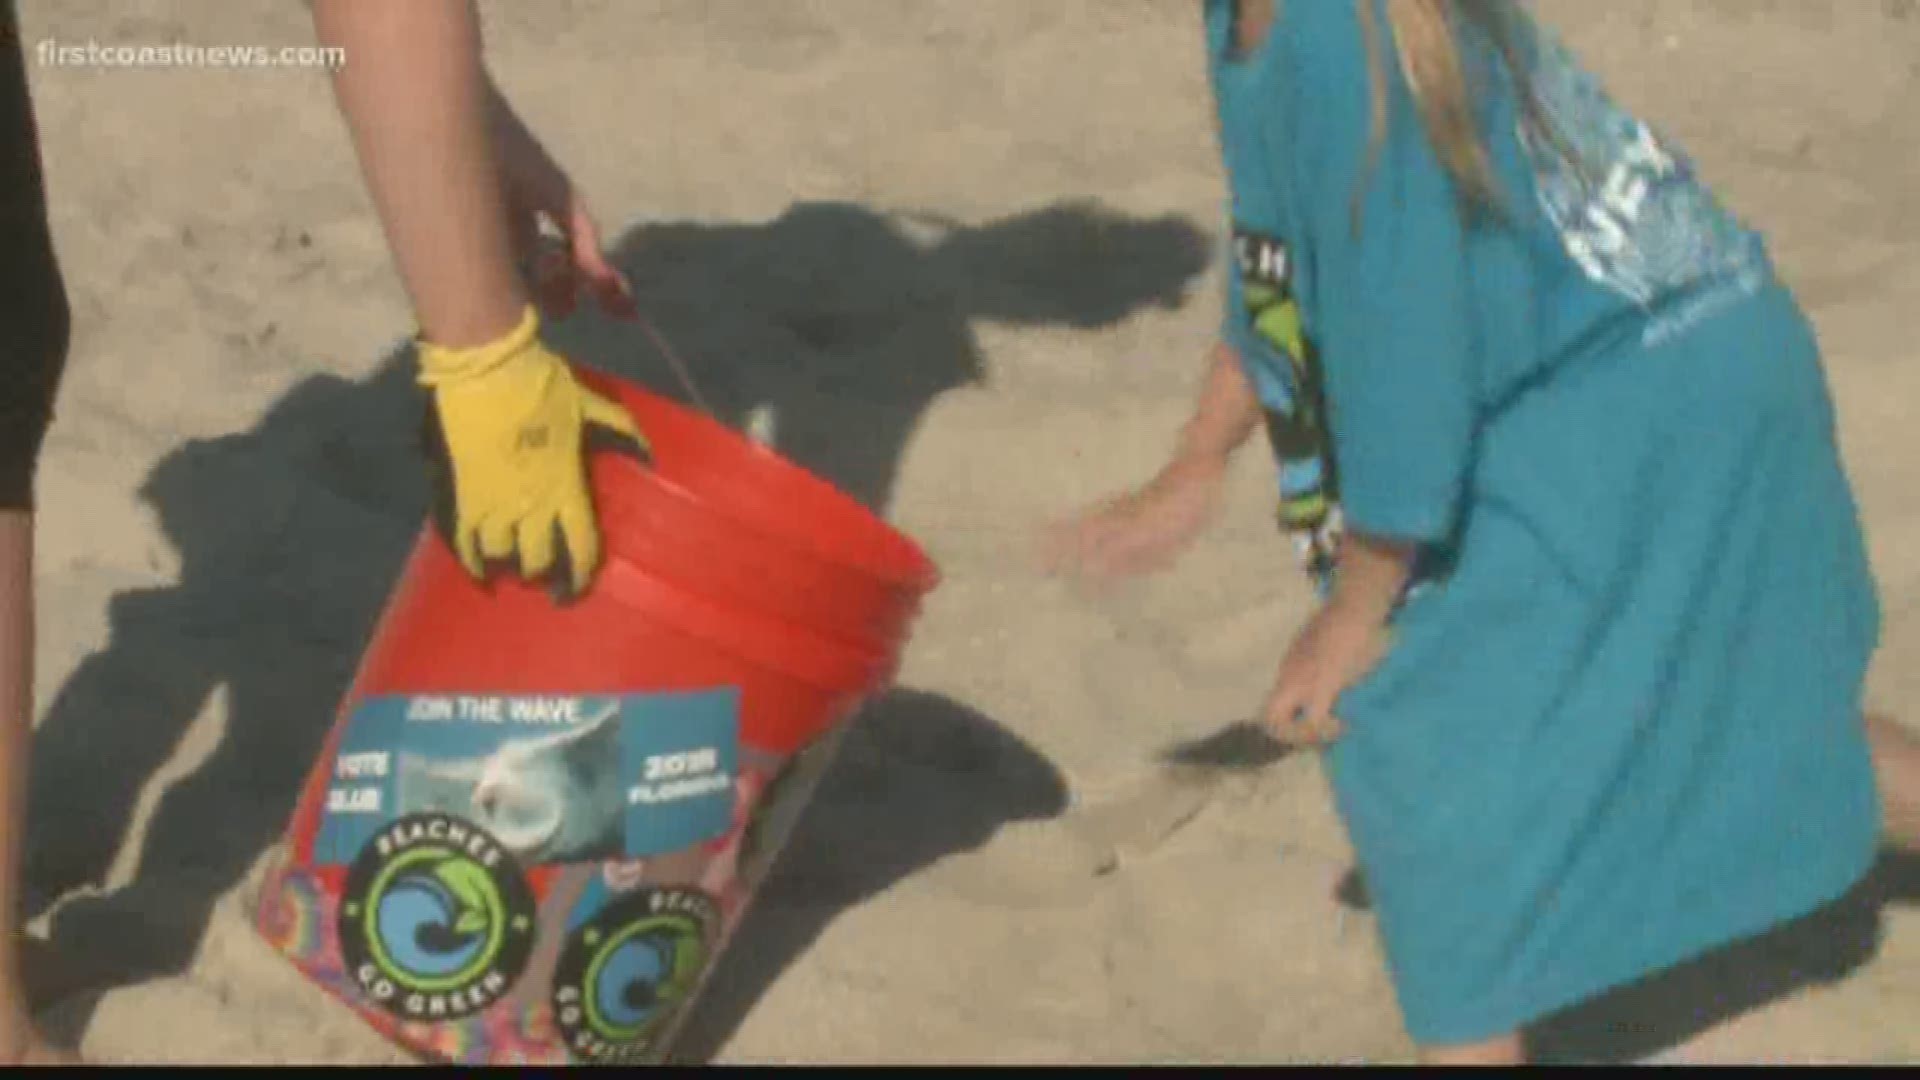 Several people spent their Sunday morning picking up trash and debris on some First Coast beaches. Beaches Go Green also made sure the trash was properly disposed or recycled.